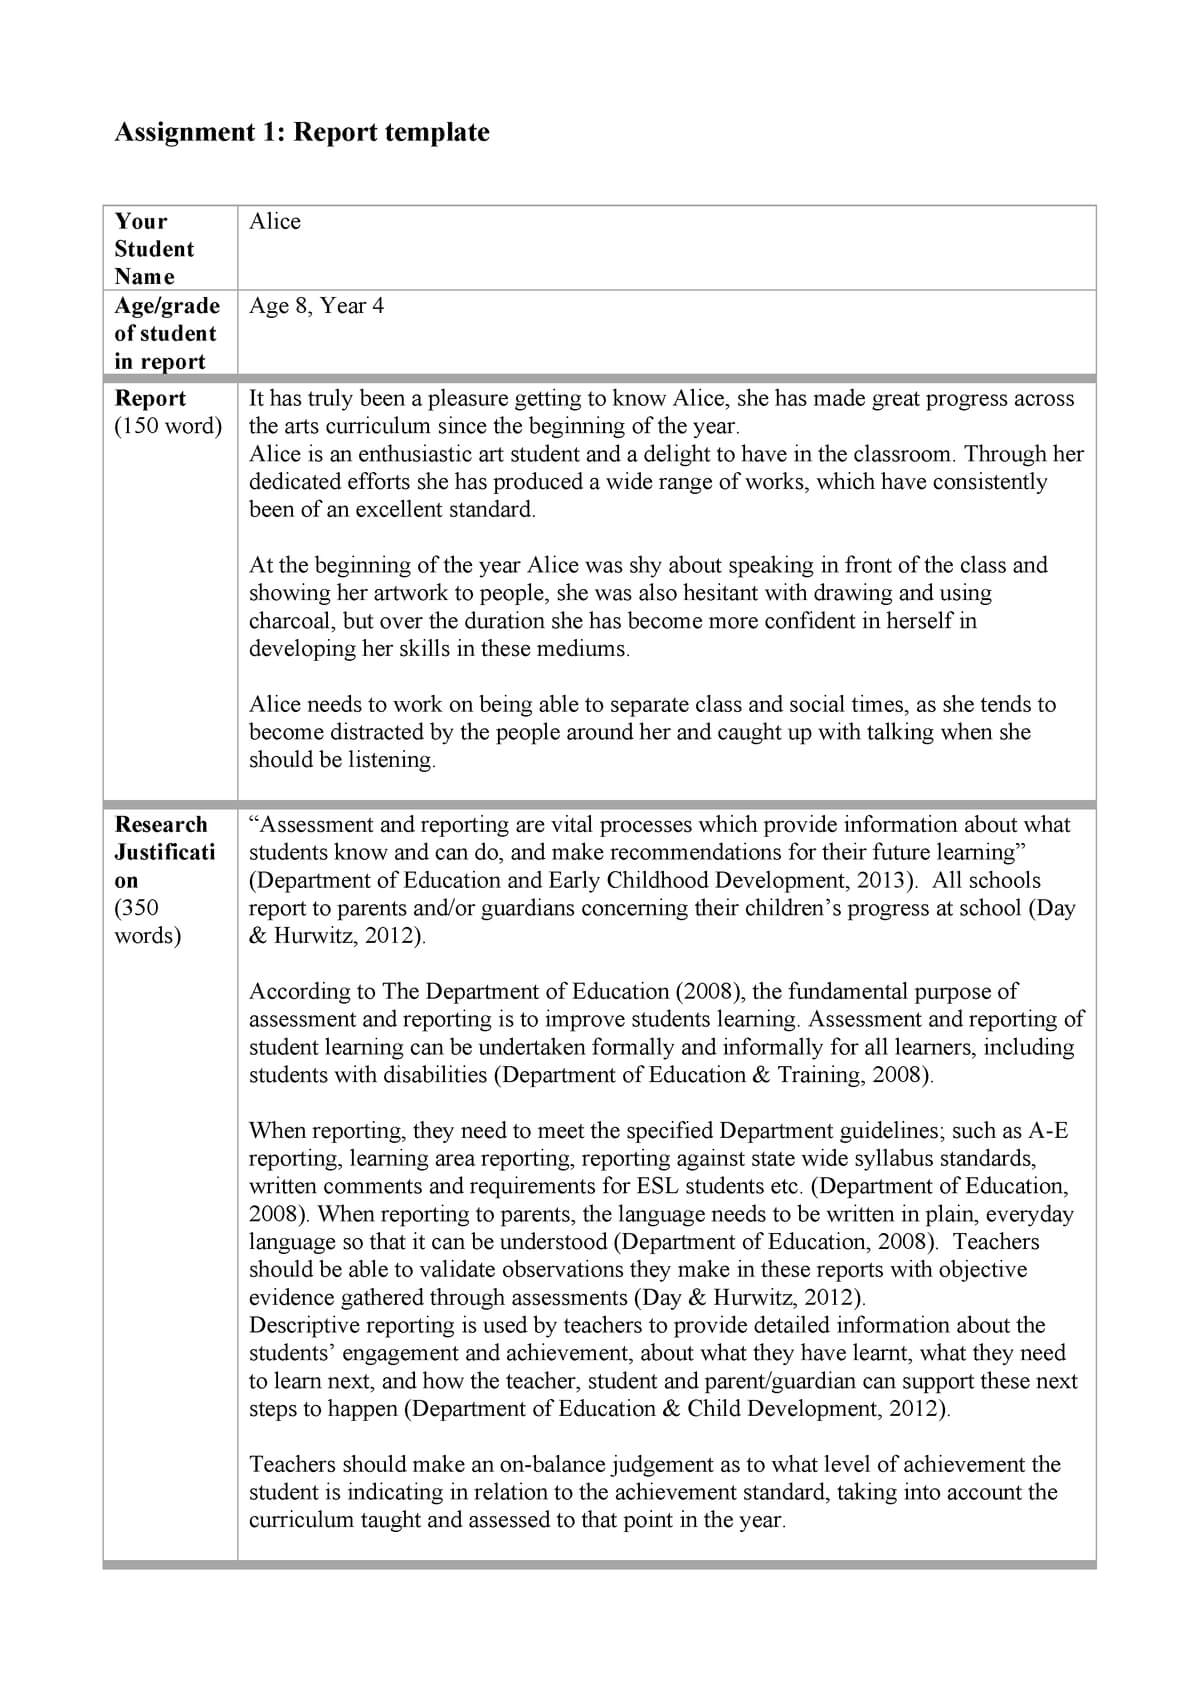 Report Template – Assignment – 6890 Arts Education 2 – Uc Intended For Assignment Report Template